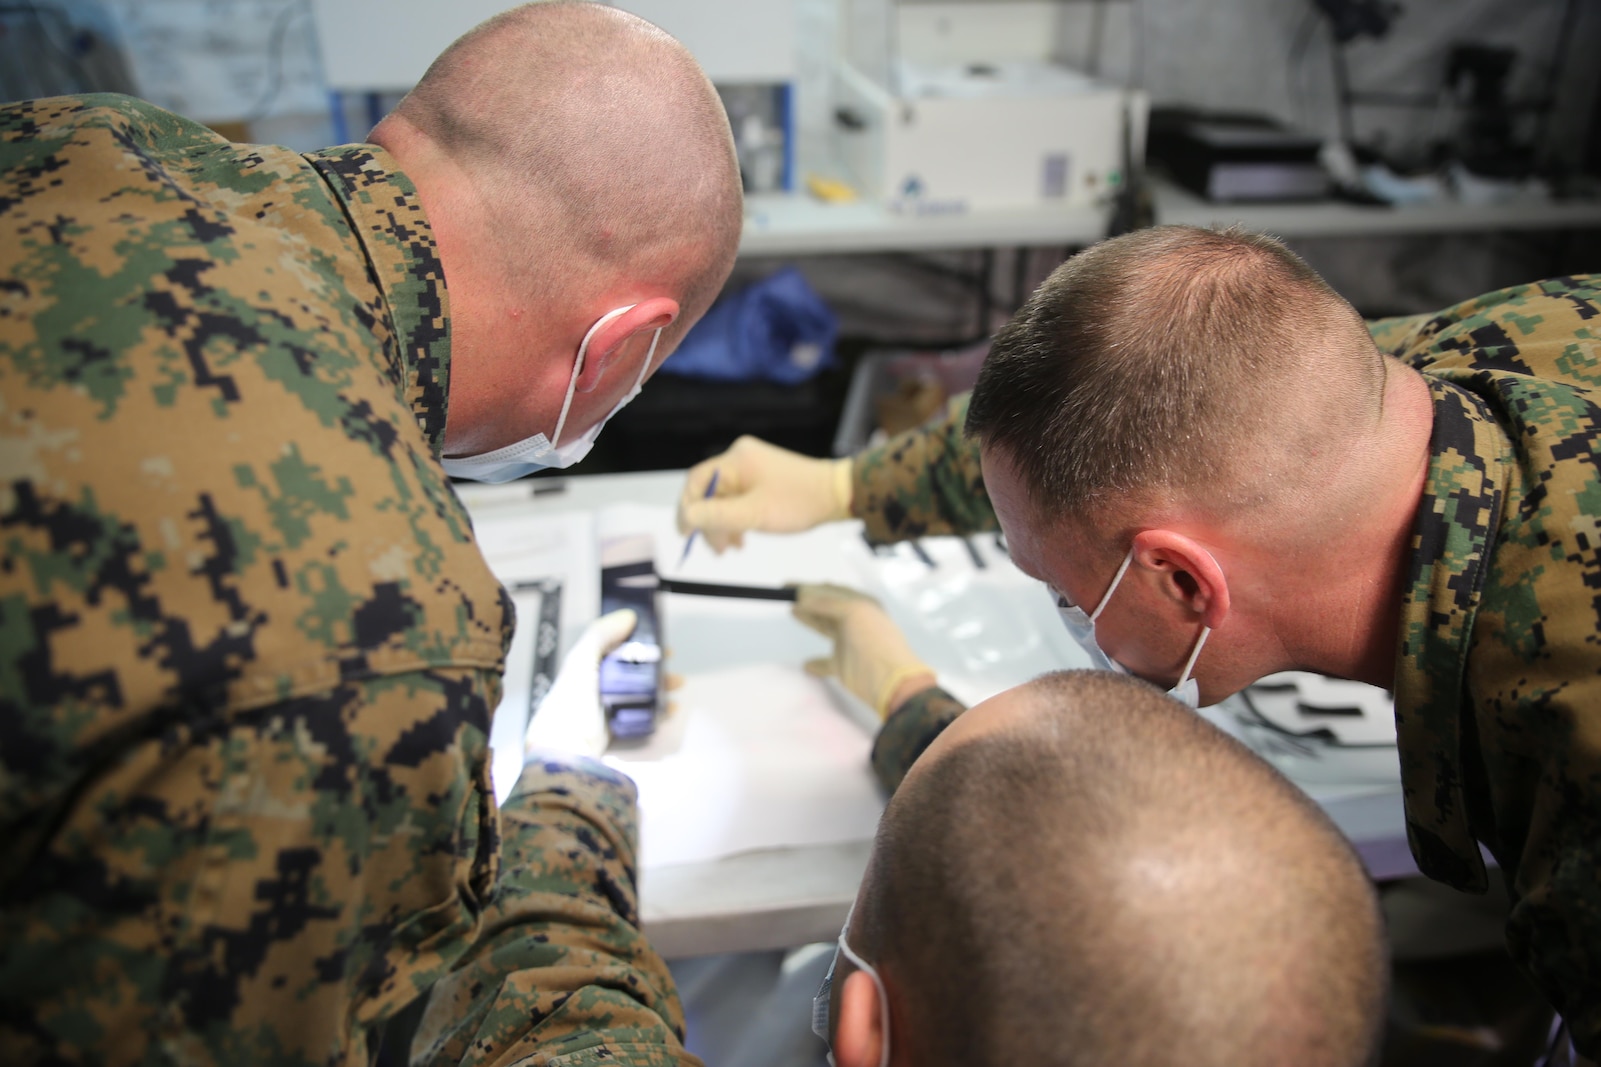 Marines with 2nd Law Enforcement Battalion conduct biometric exploitation during Tactical Site Exploitation training at Camp Lejeune, N.C., March 3, 2016. The unit built their own laboratory on the field to examine fingerprints and other critical pieces of evidence to recognize and assess possible enemy identities. (U.S. Marine Corps photo by Lance Cpl. Samuel Guerra/Released) 